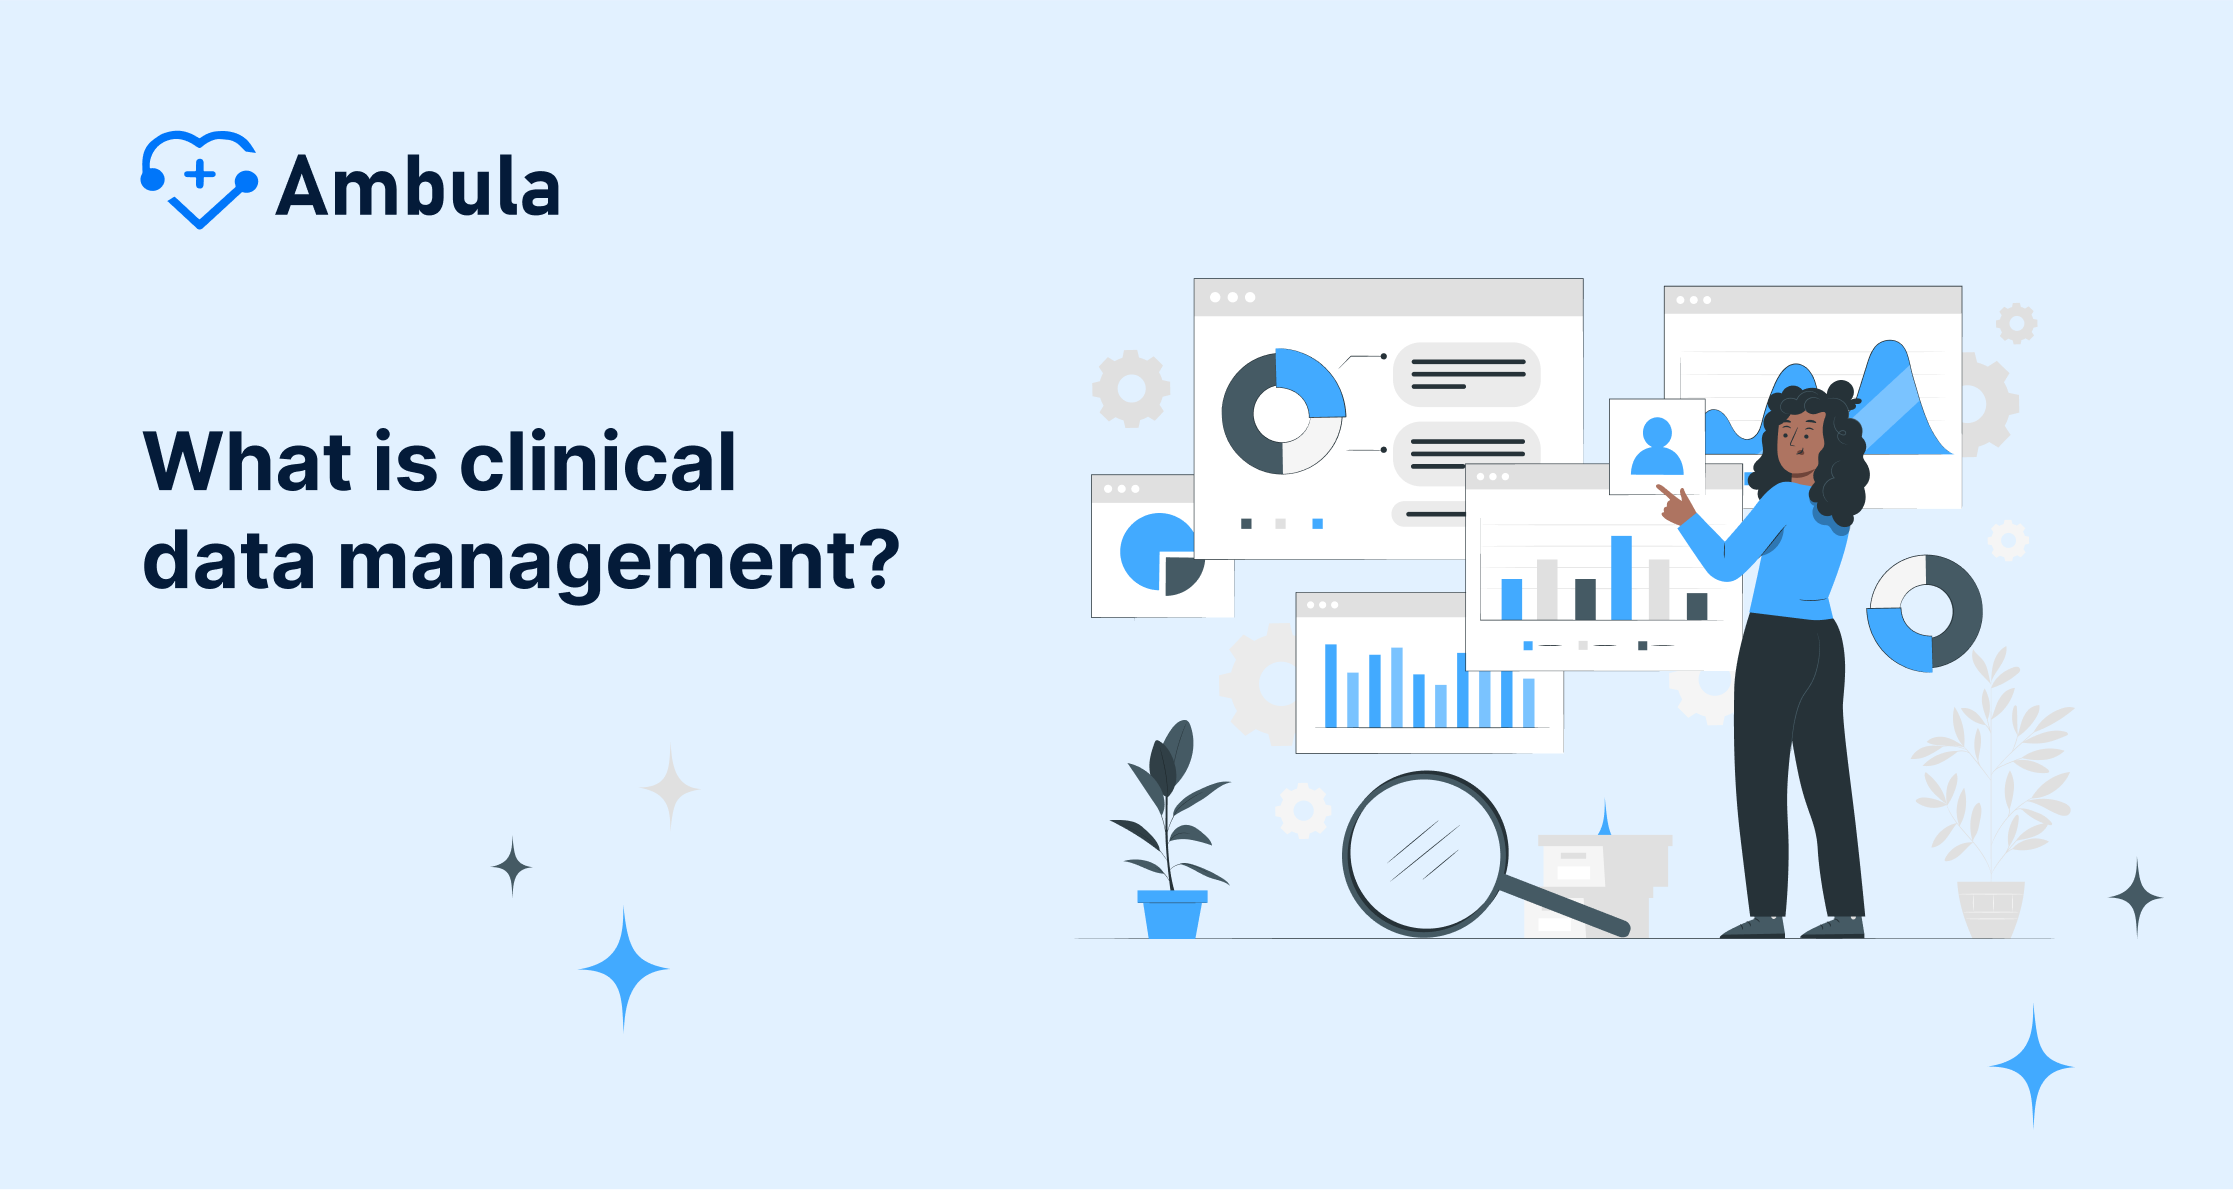 What is clinical data management?